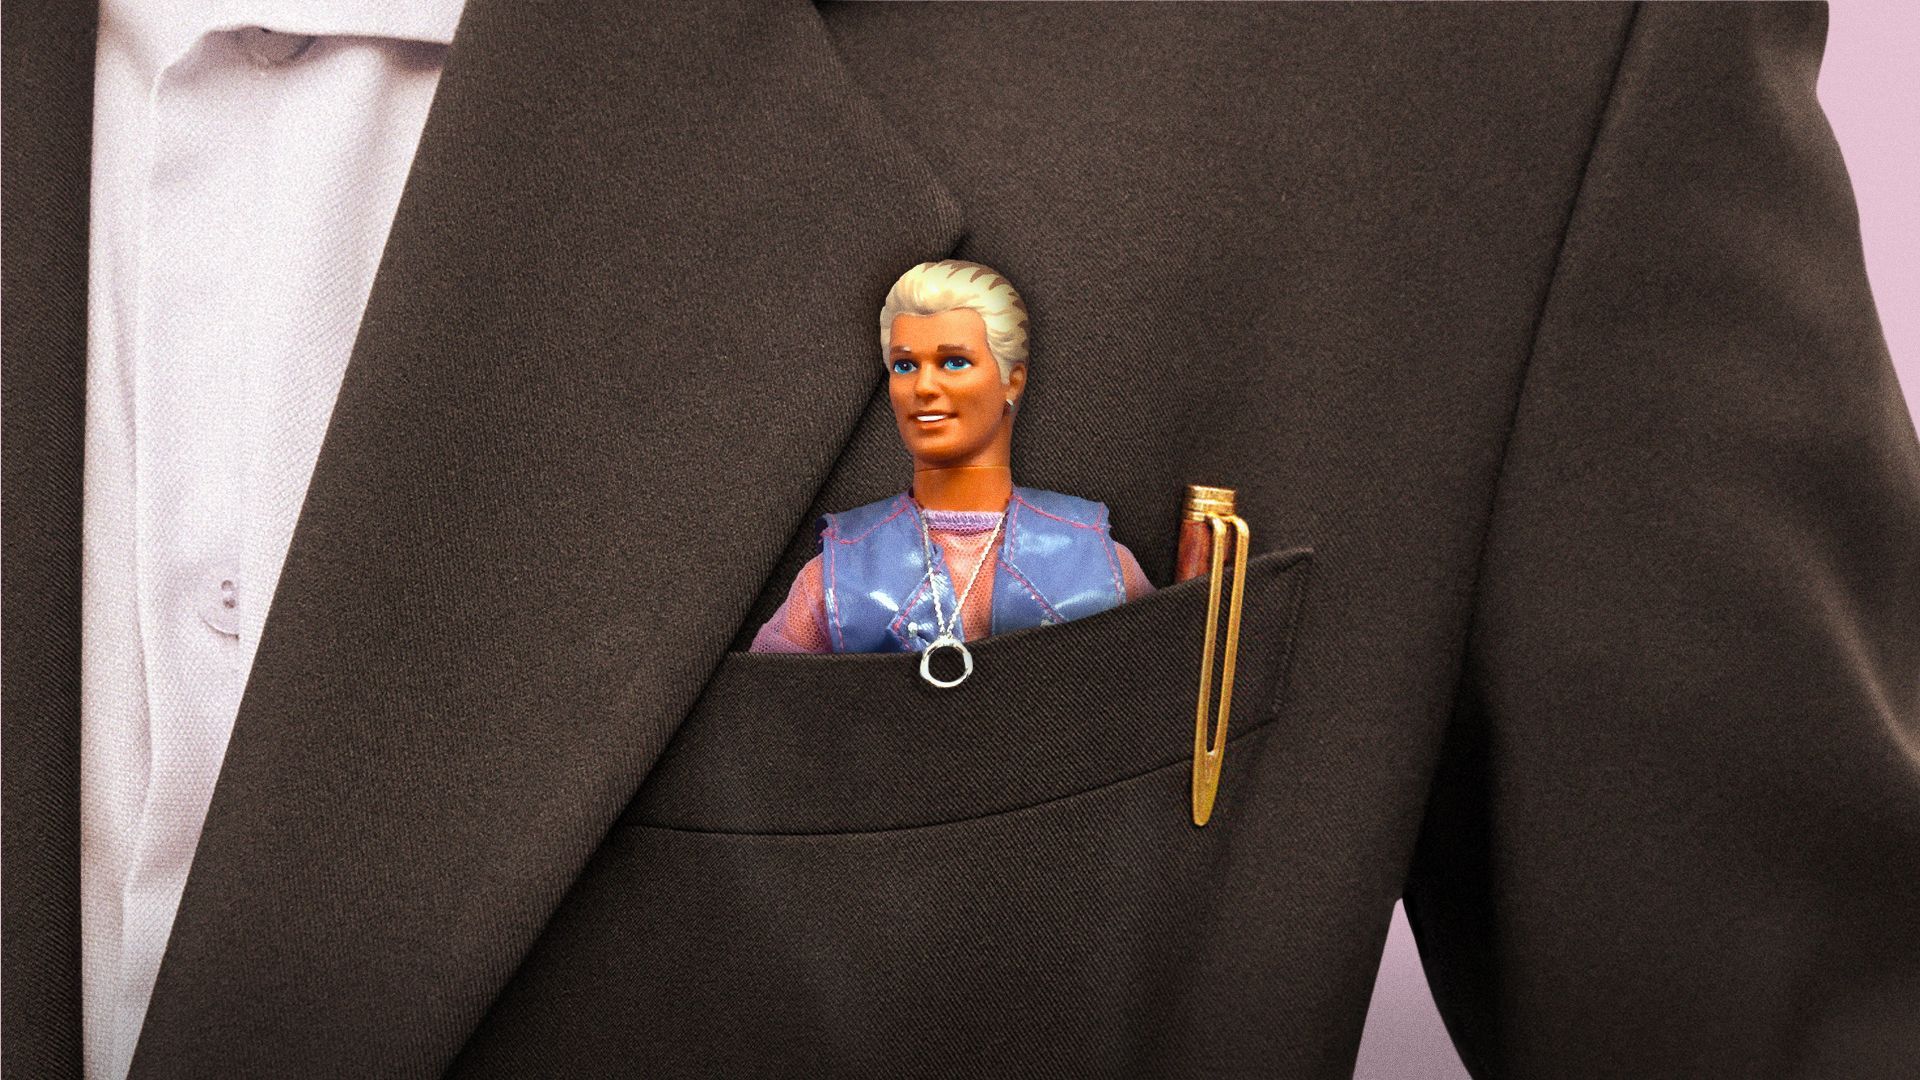 Photo illustration of an Earring Magic Ken doll peeking out of a suit pocket.